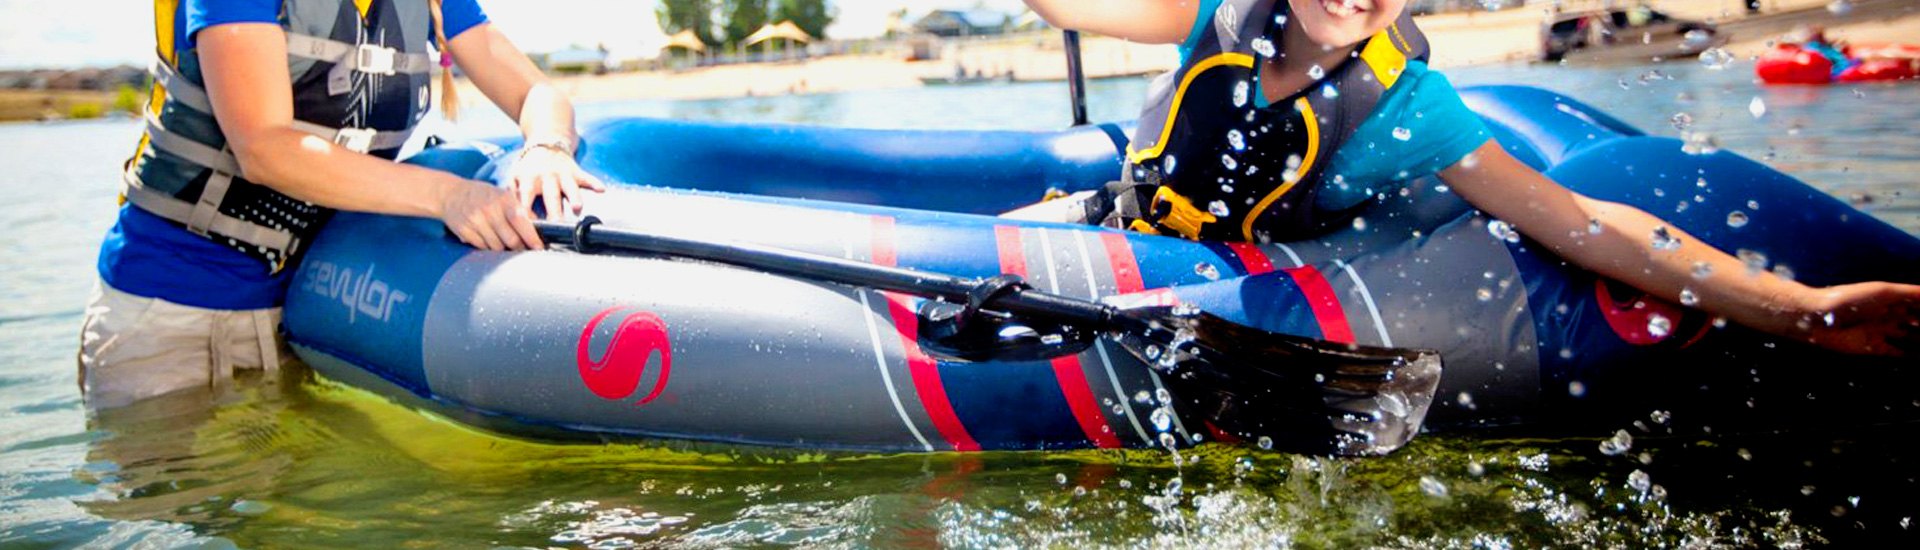 Inflatable Boats | Lightweight and Inexpensive Ways to Go Fishing (or Just Floating)